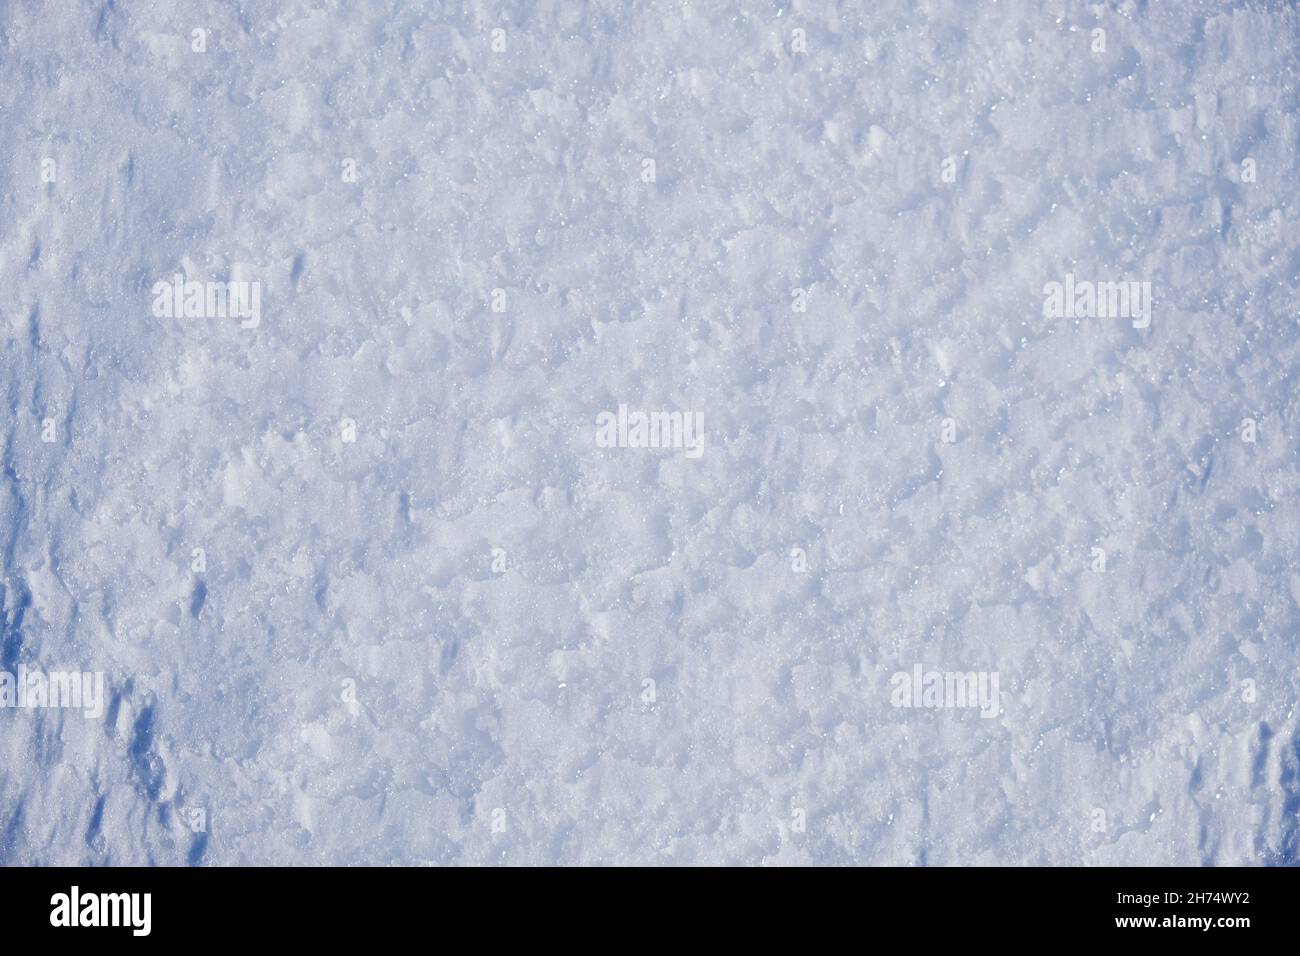 Texture of winter snow surface. Blue natural snow background with drawings made by the wind. Stock Photo